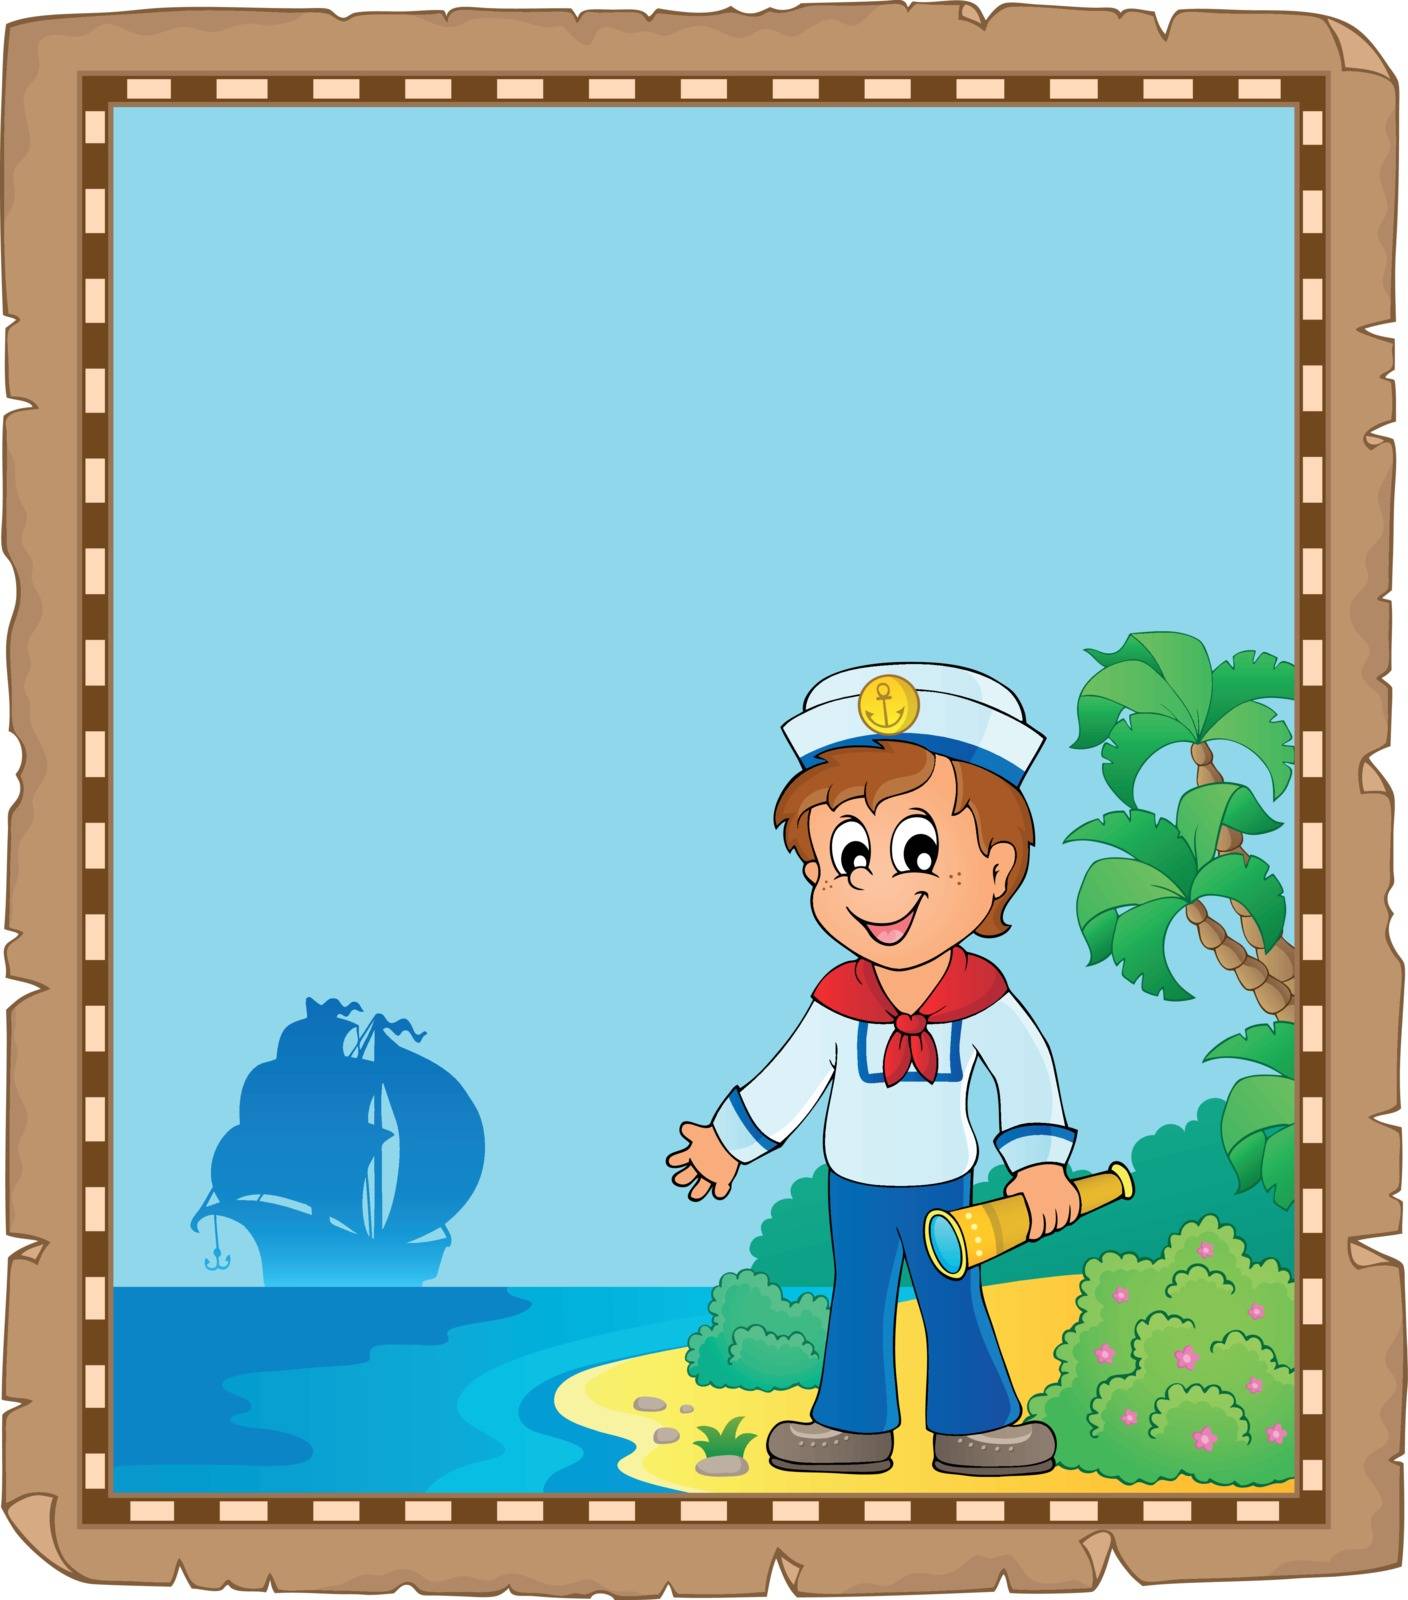 Parchment with young sailor - eps10 vector illustration.